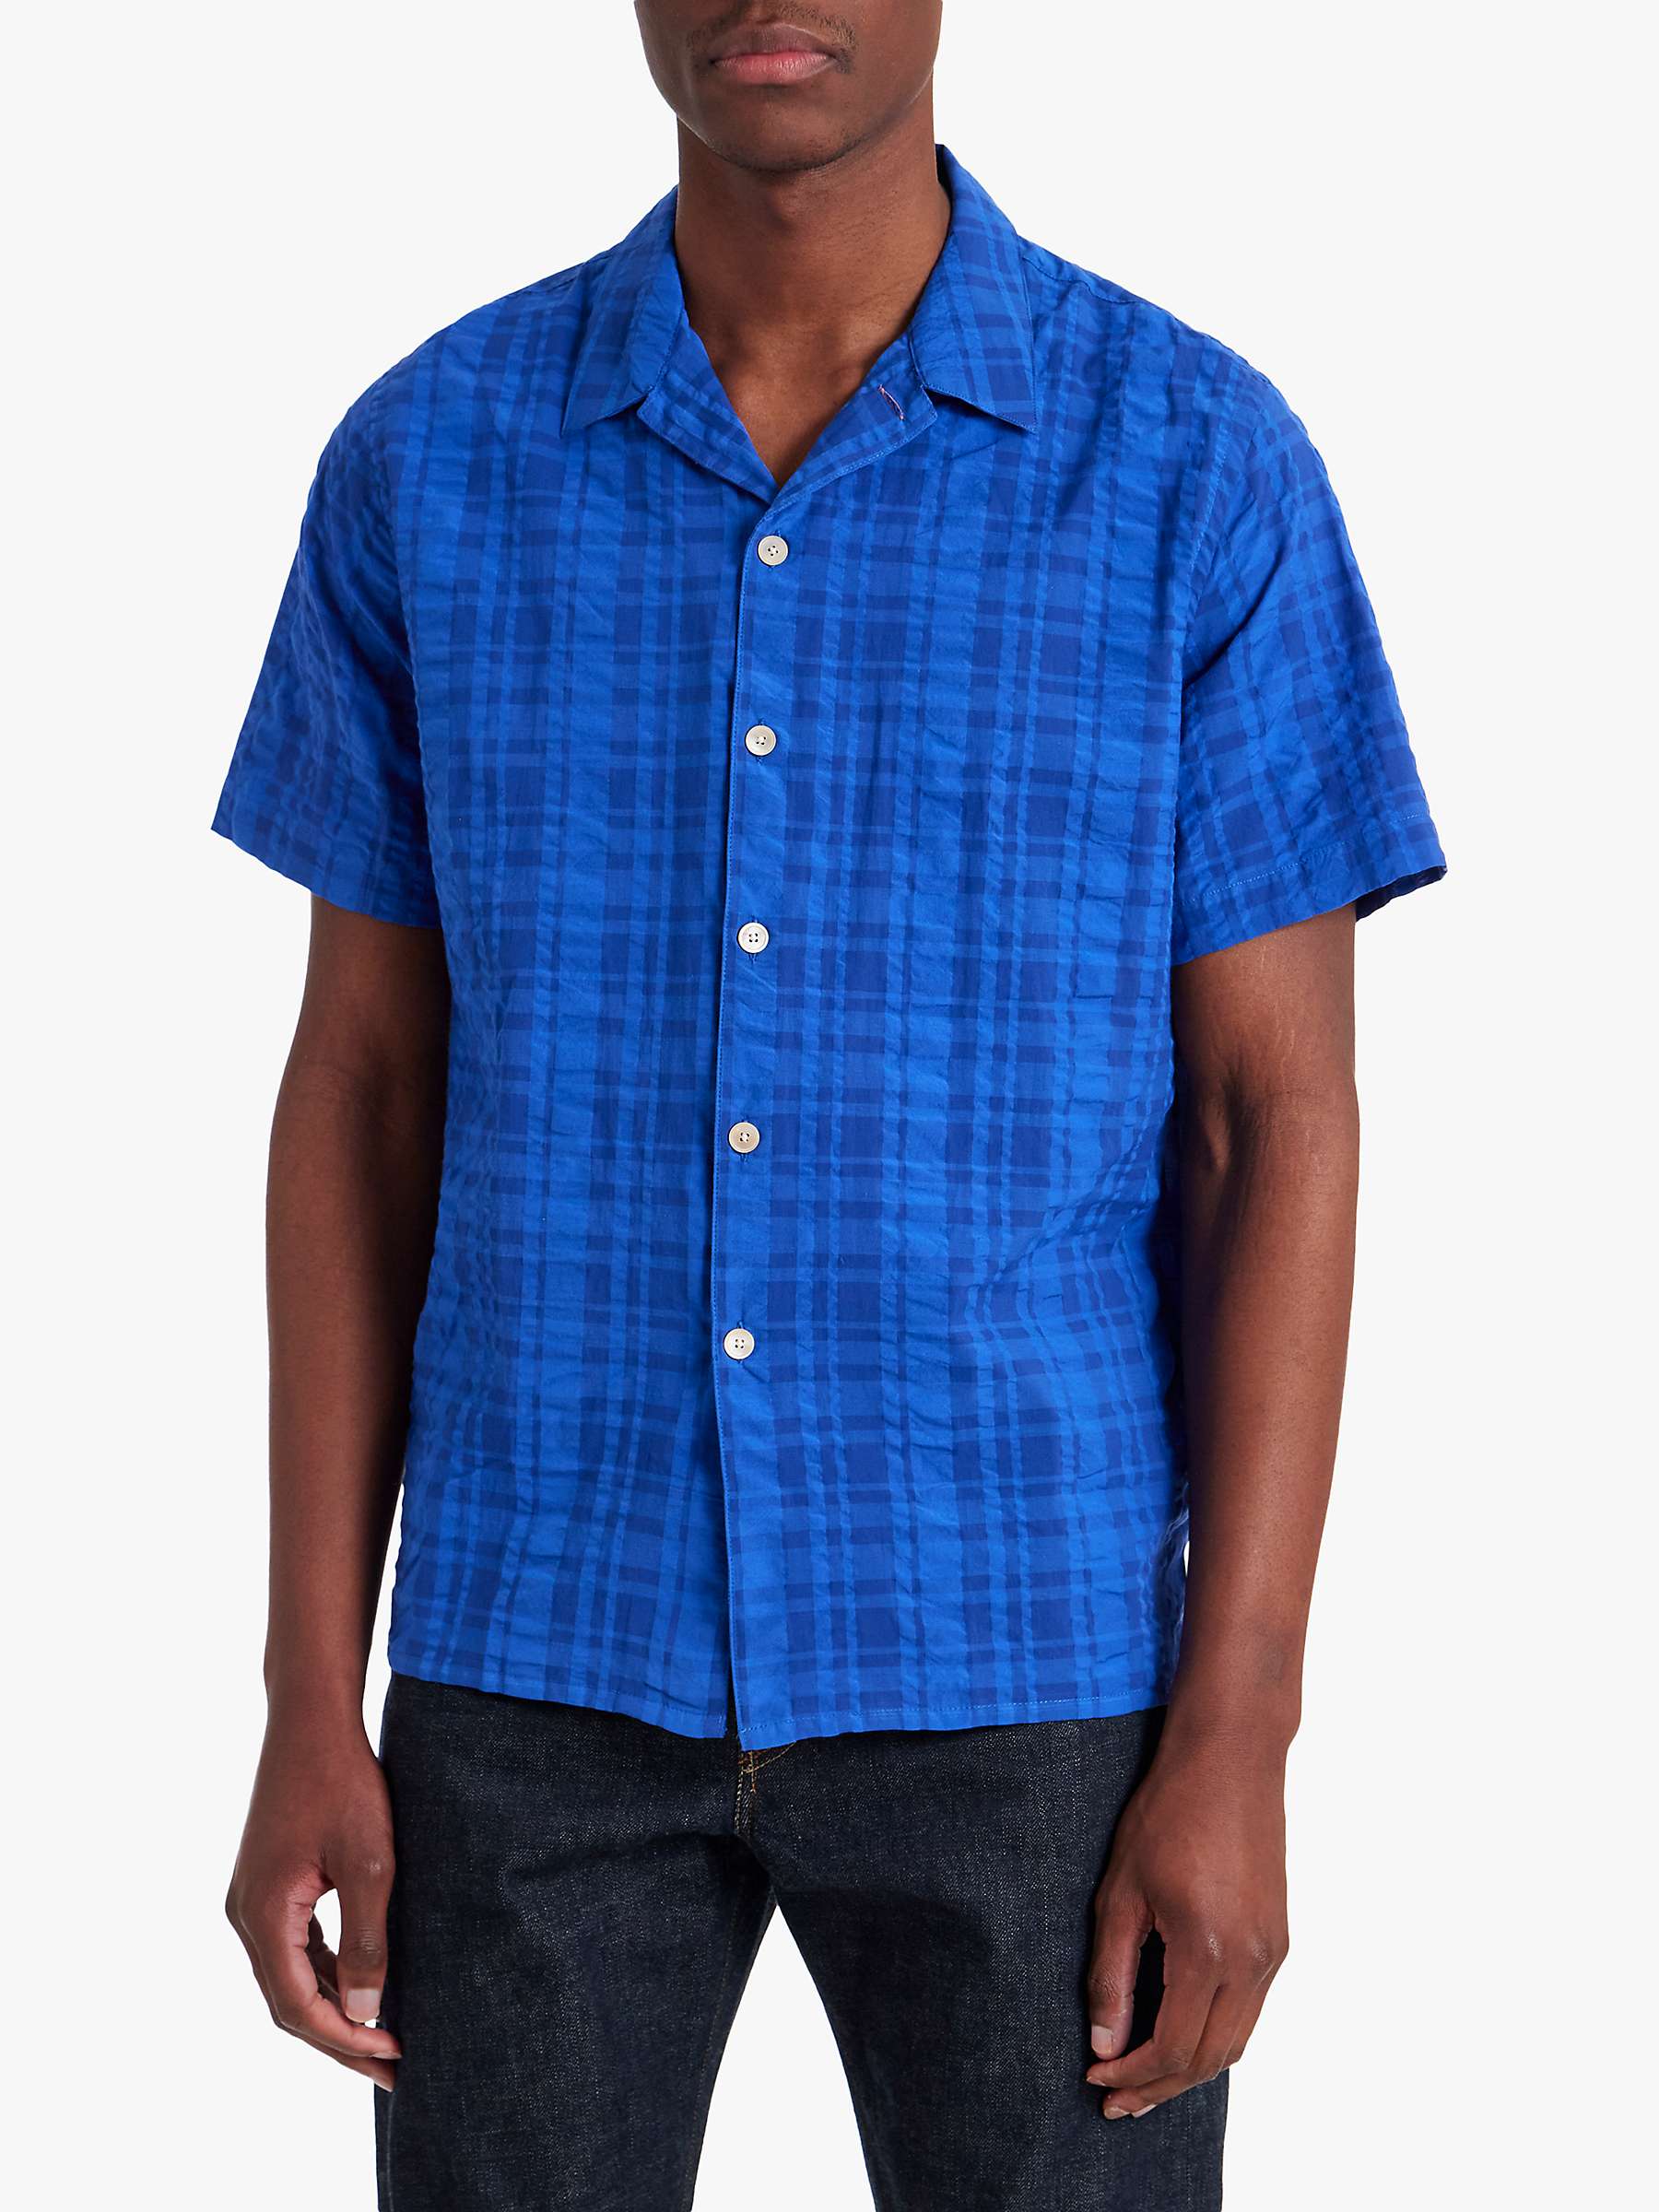 Buy PS Paul Smith Cotton Short Sleeve Check Shirt, Blues Online at johnlewis.com